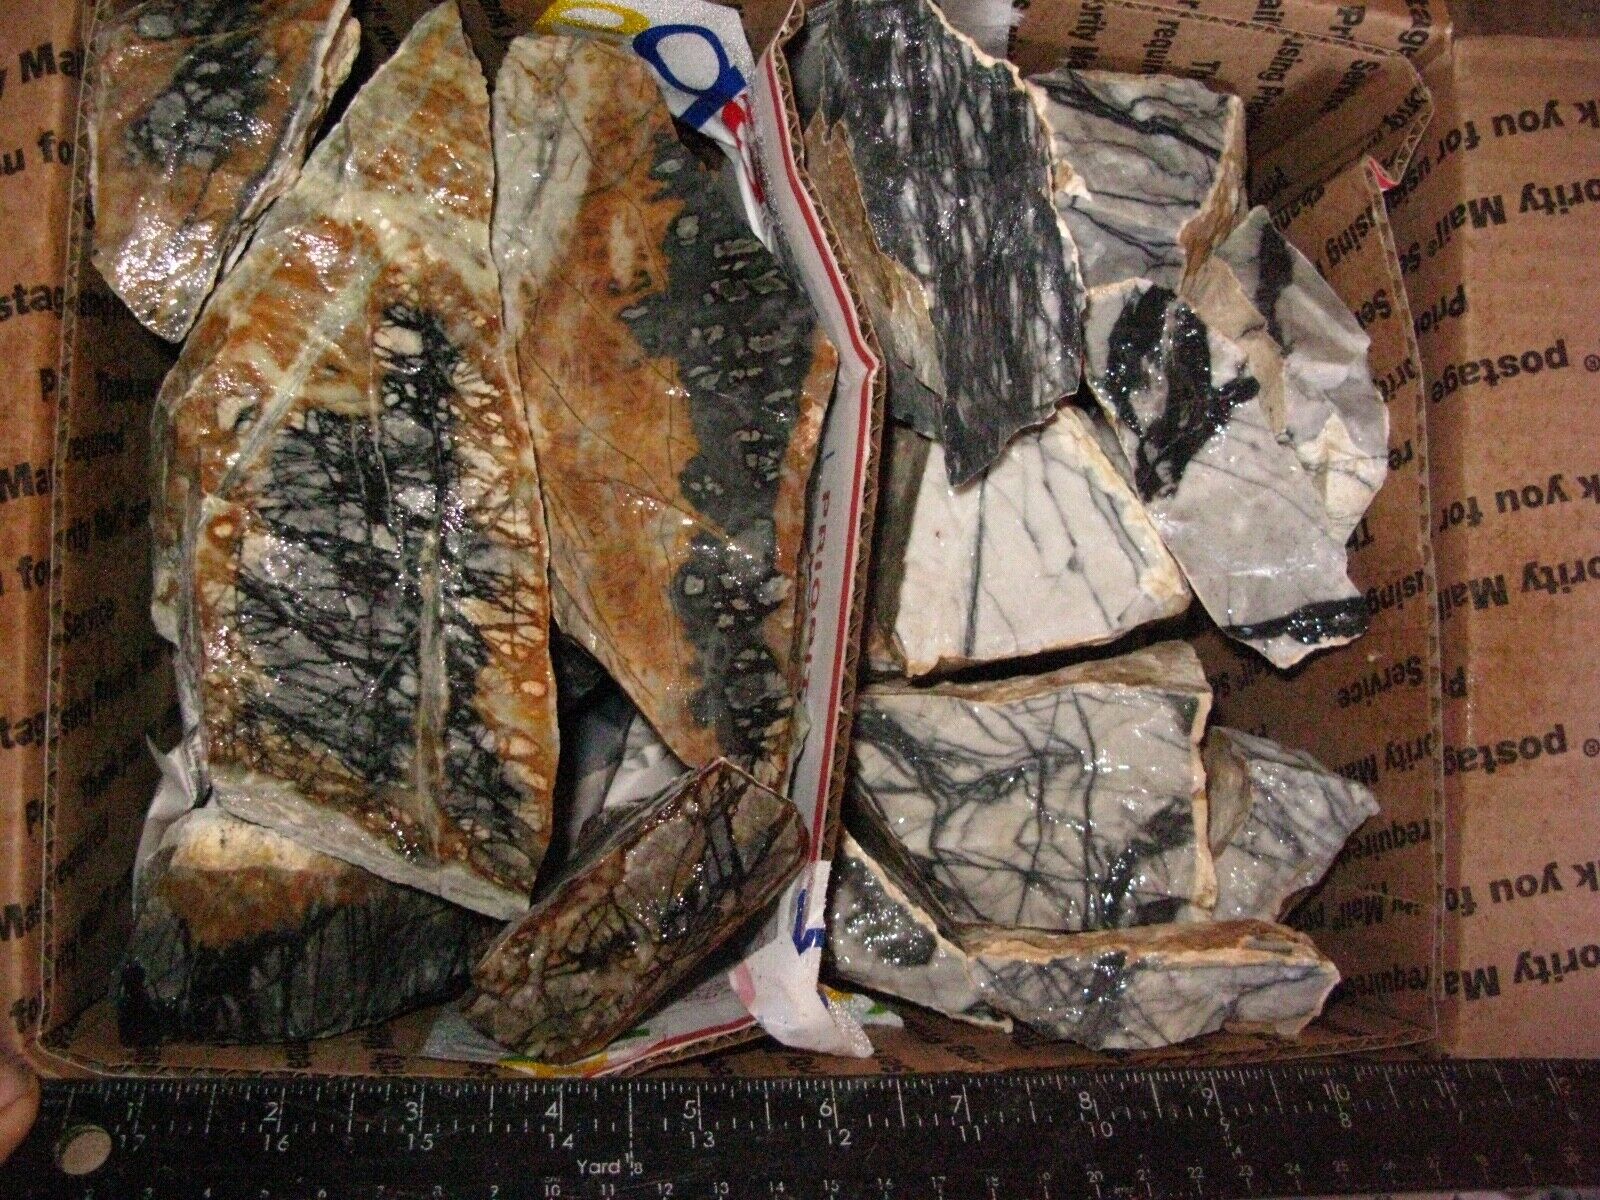 BOX OF 1/2 PRIMO PICASSO 1/2 PRIMO SPIDER WEB MARBLE,CAB,SLAB,LAPIDARY 16+POUNDS